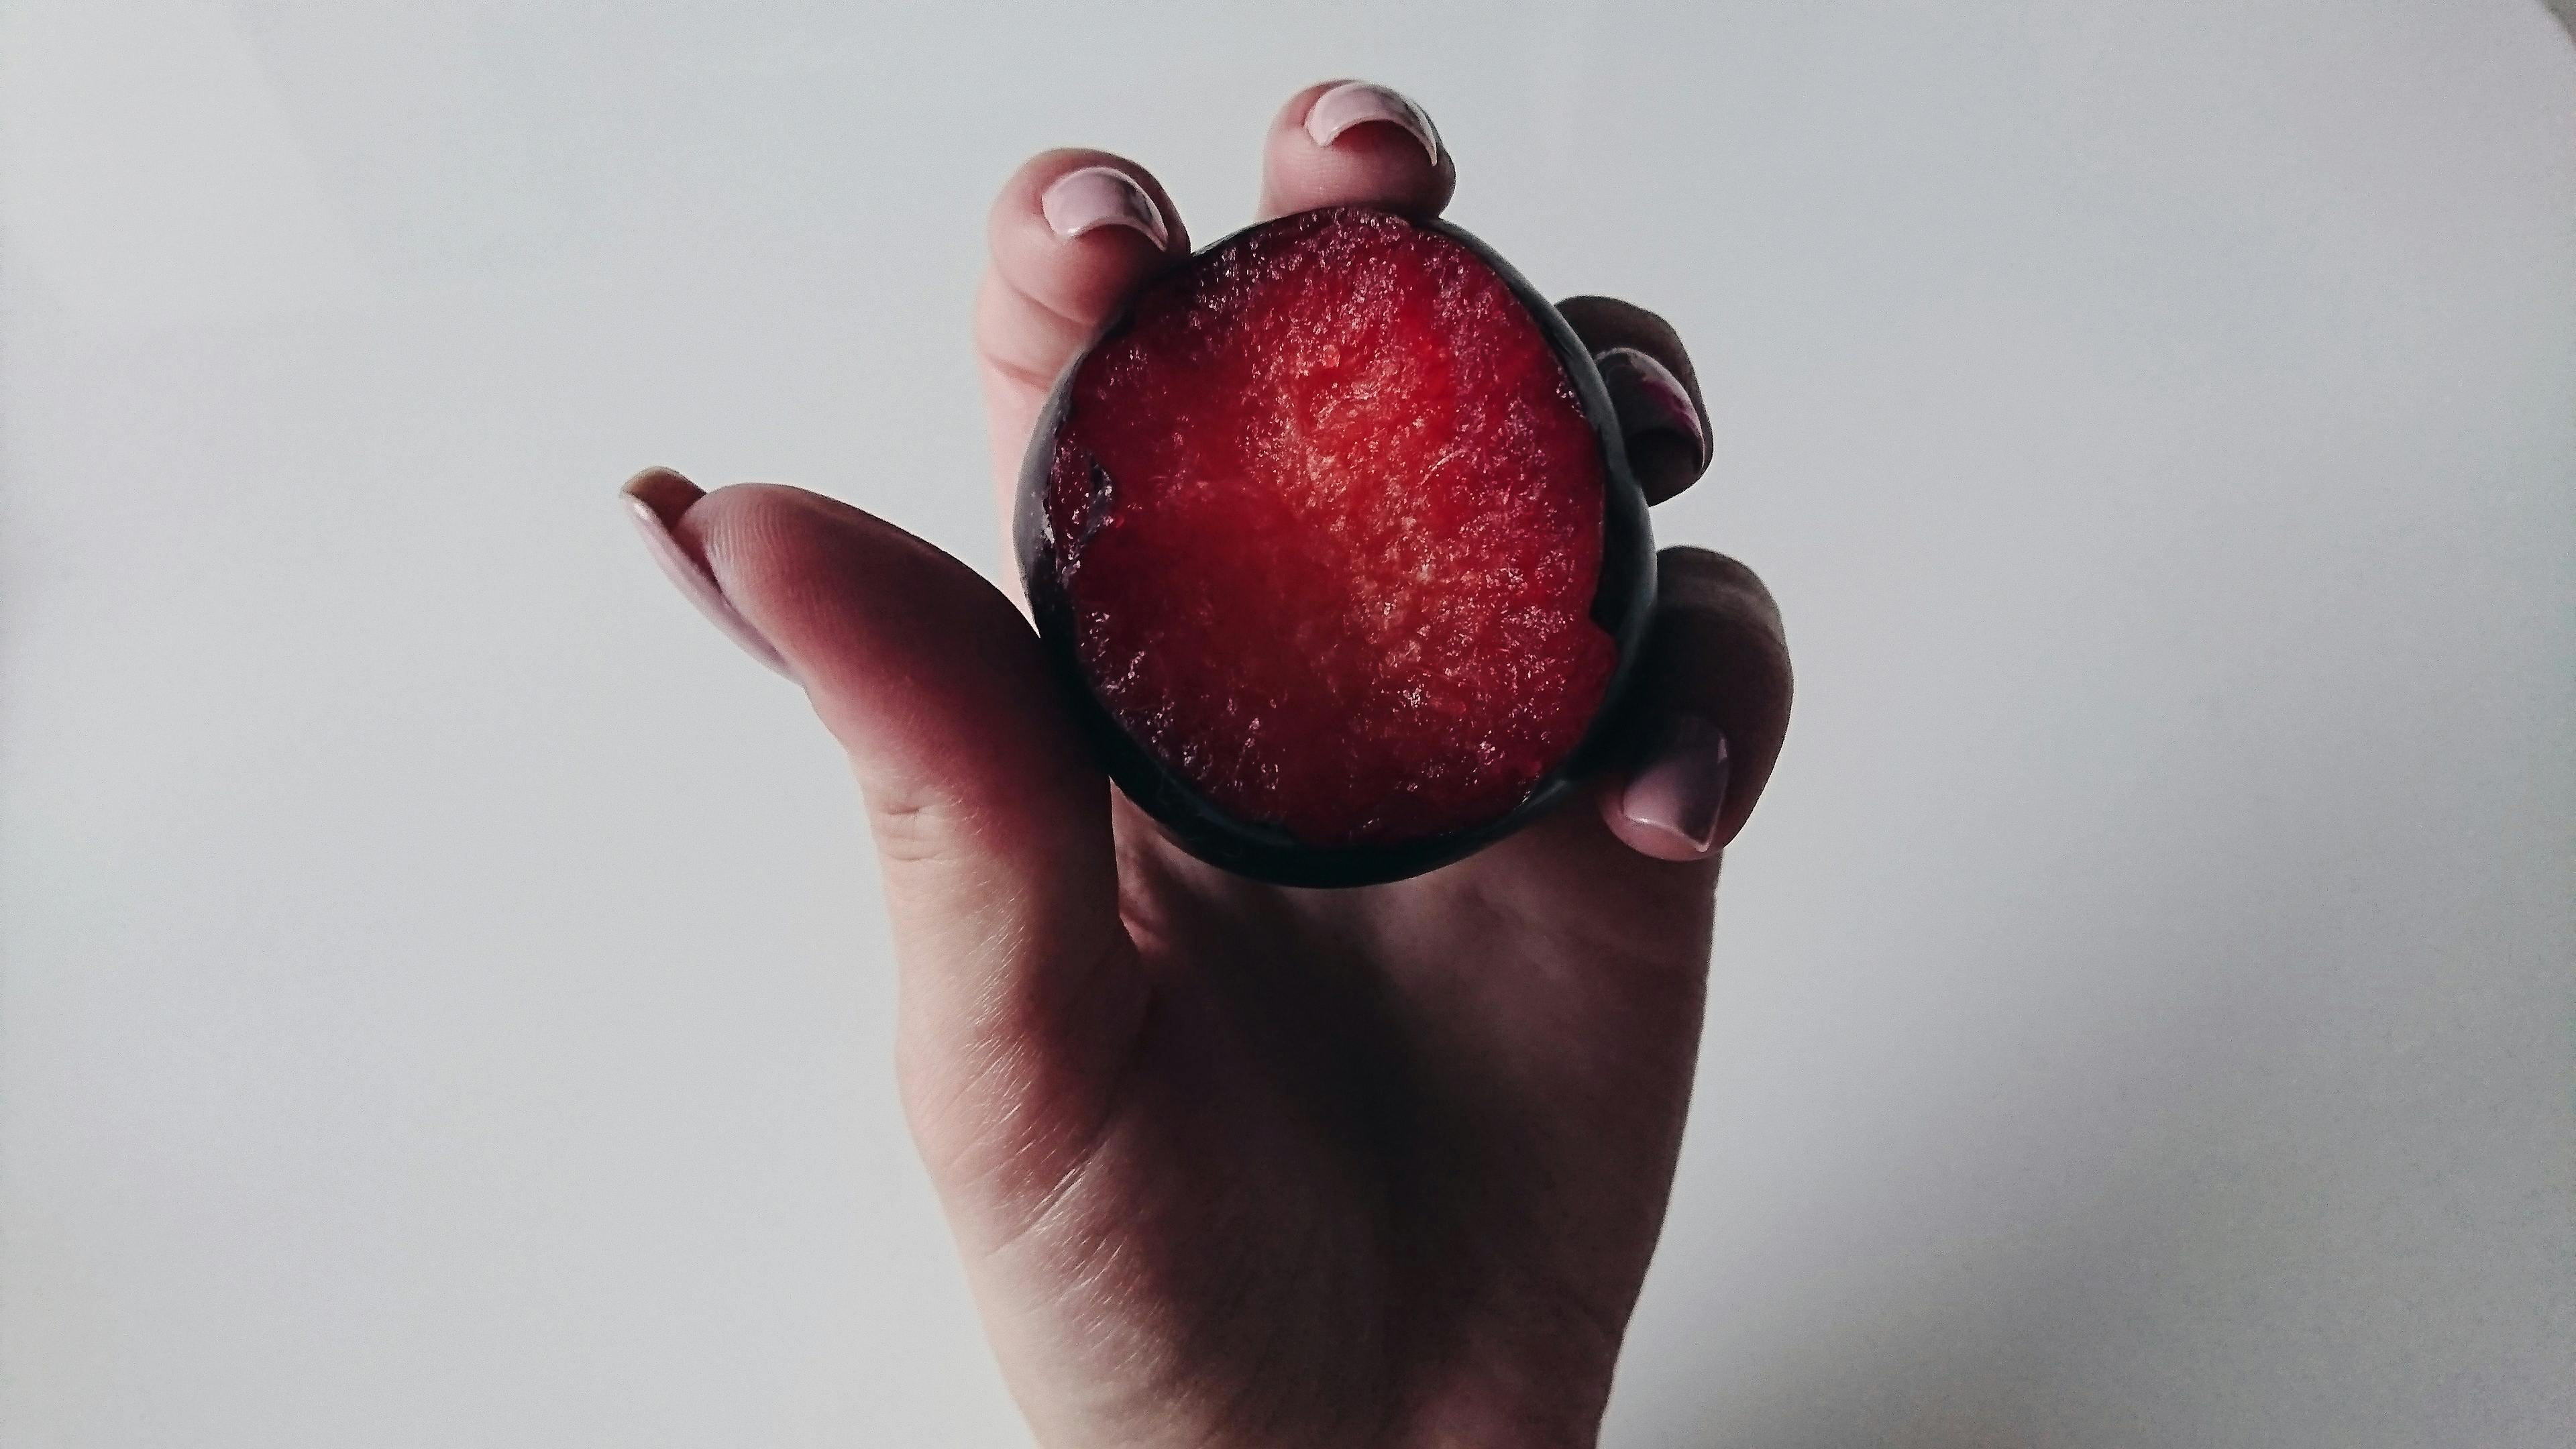 Free stock photo of #fruit #red #food #hand